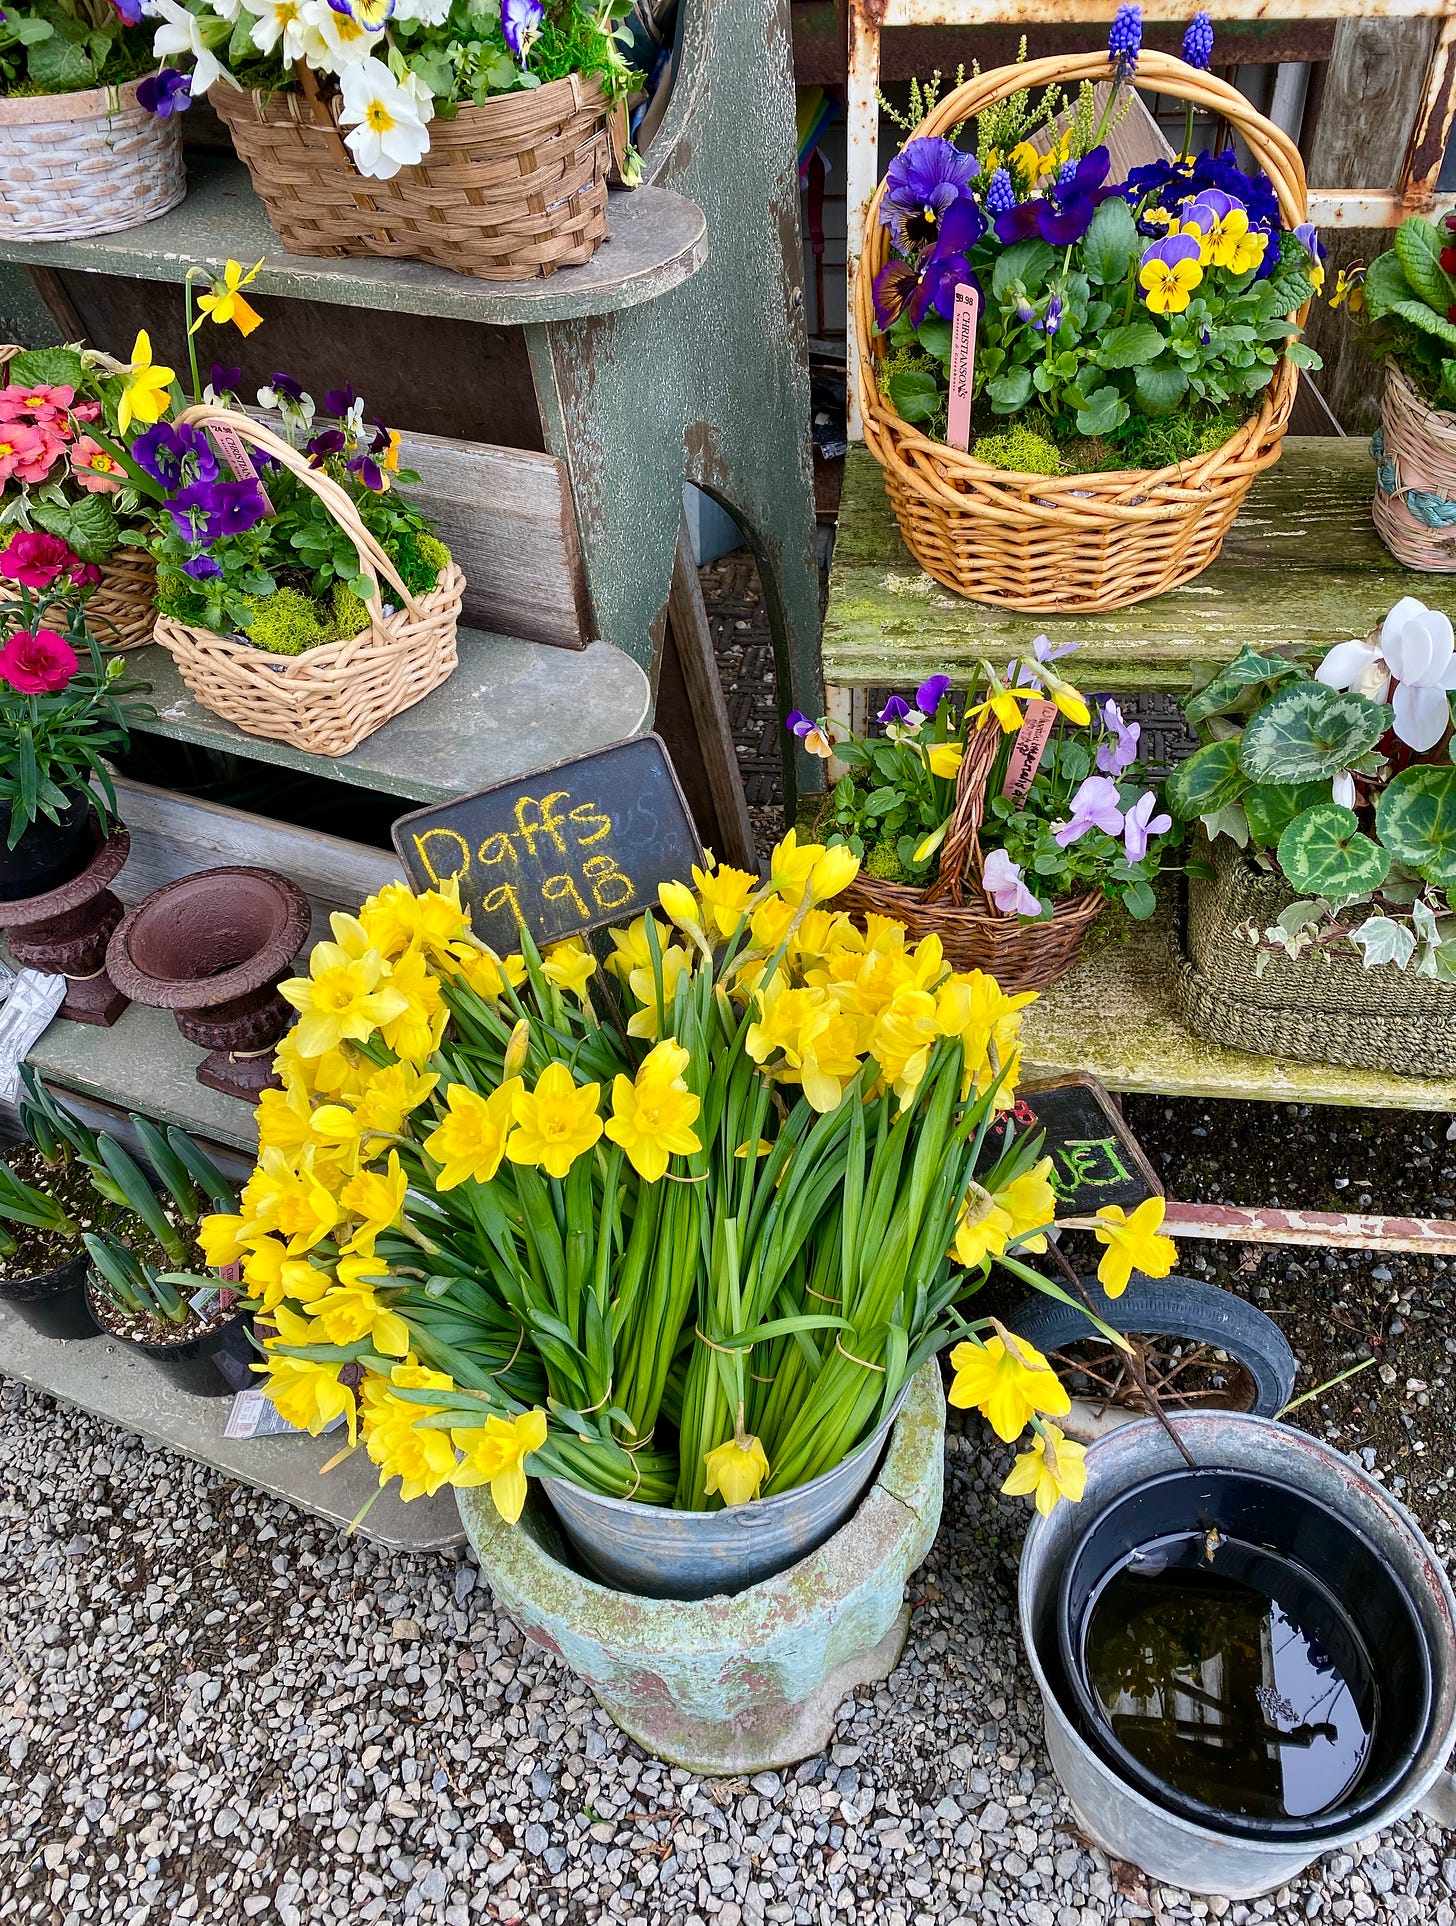 Daffs and spring flowers